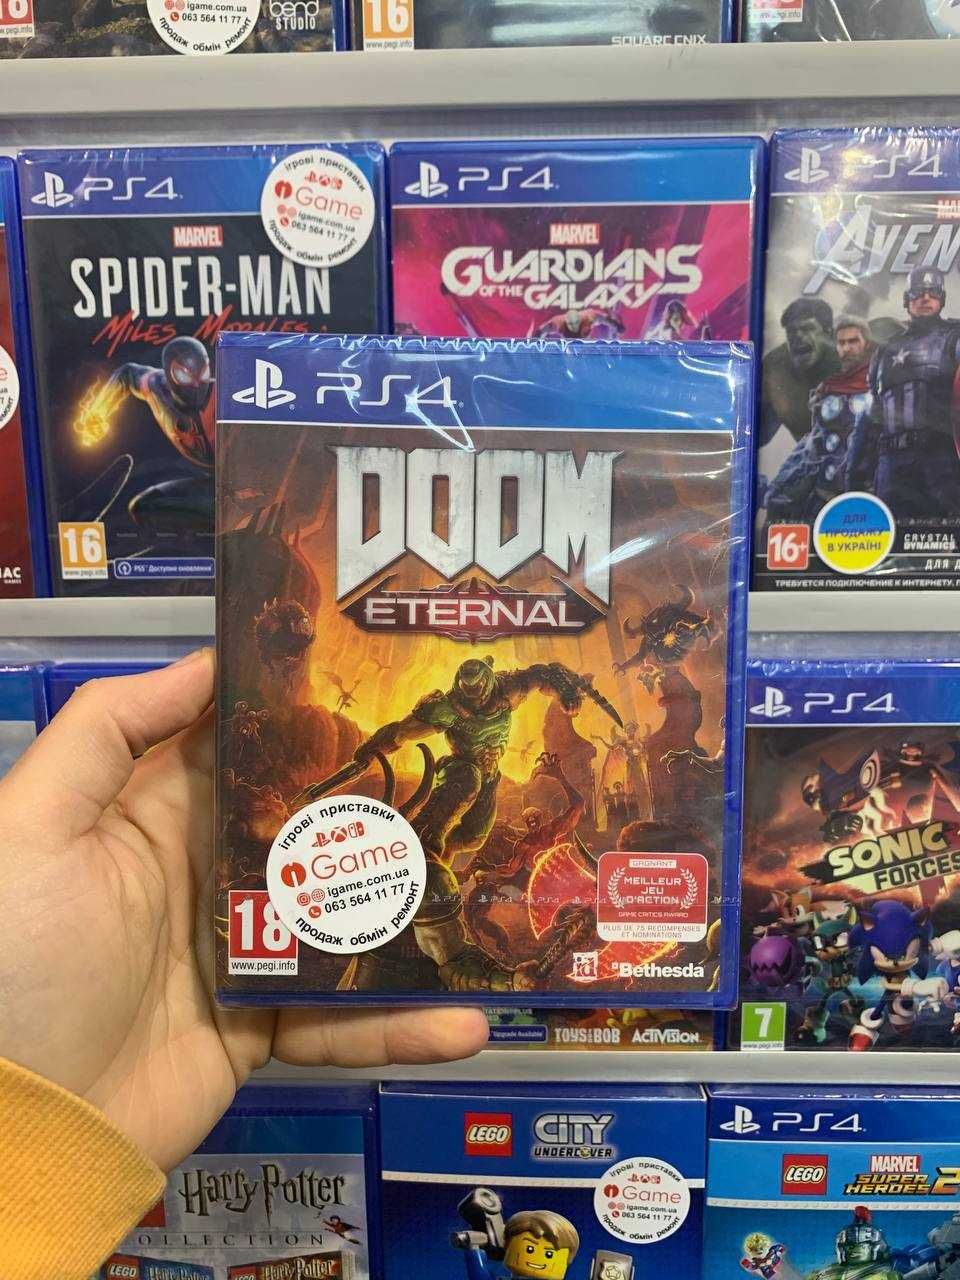 Doom Eternal, Дум Ps4, Ps5 igame